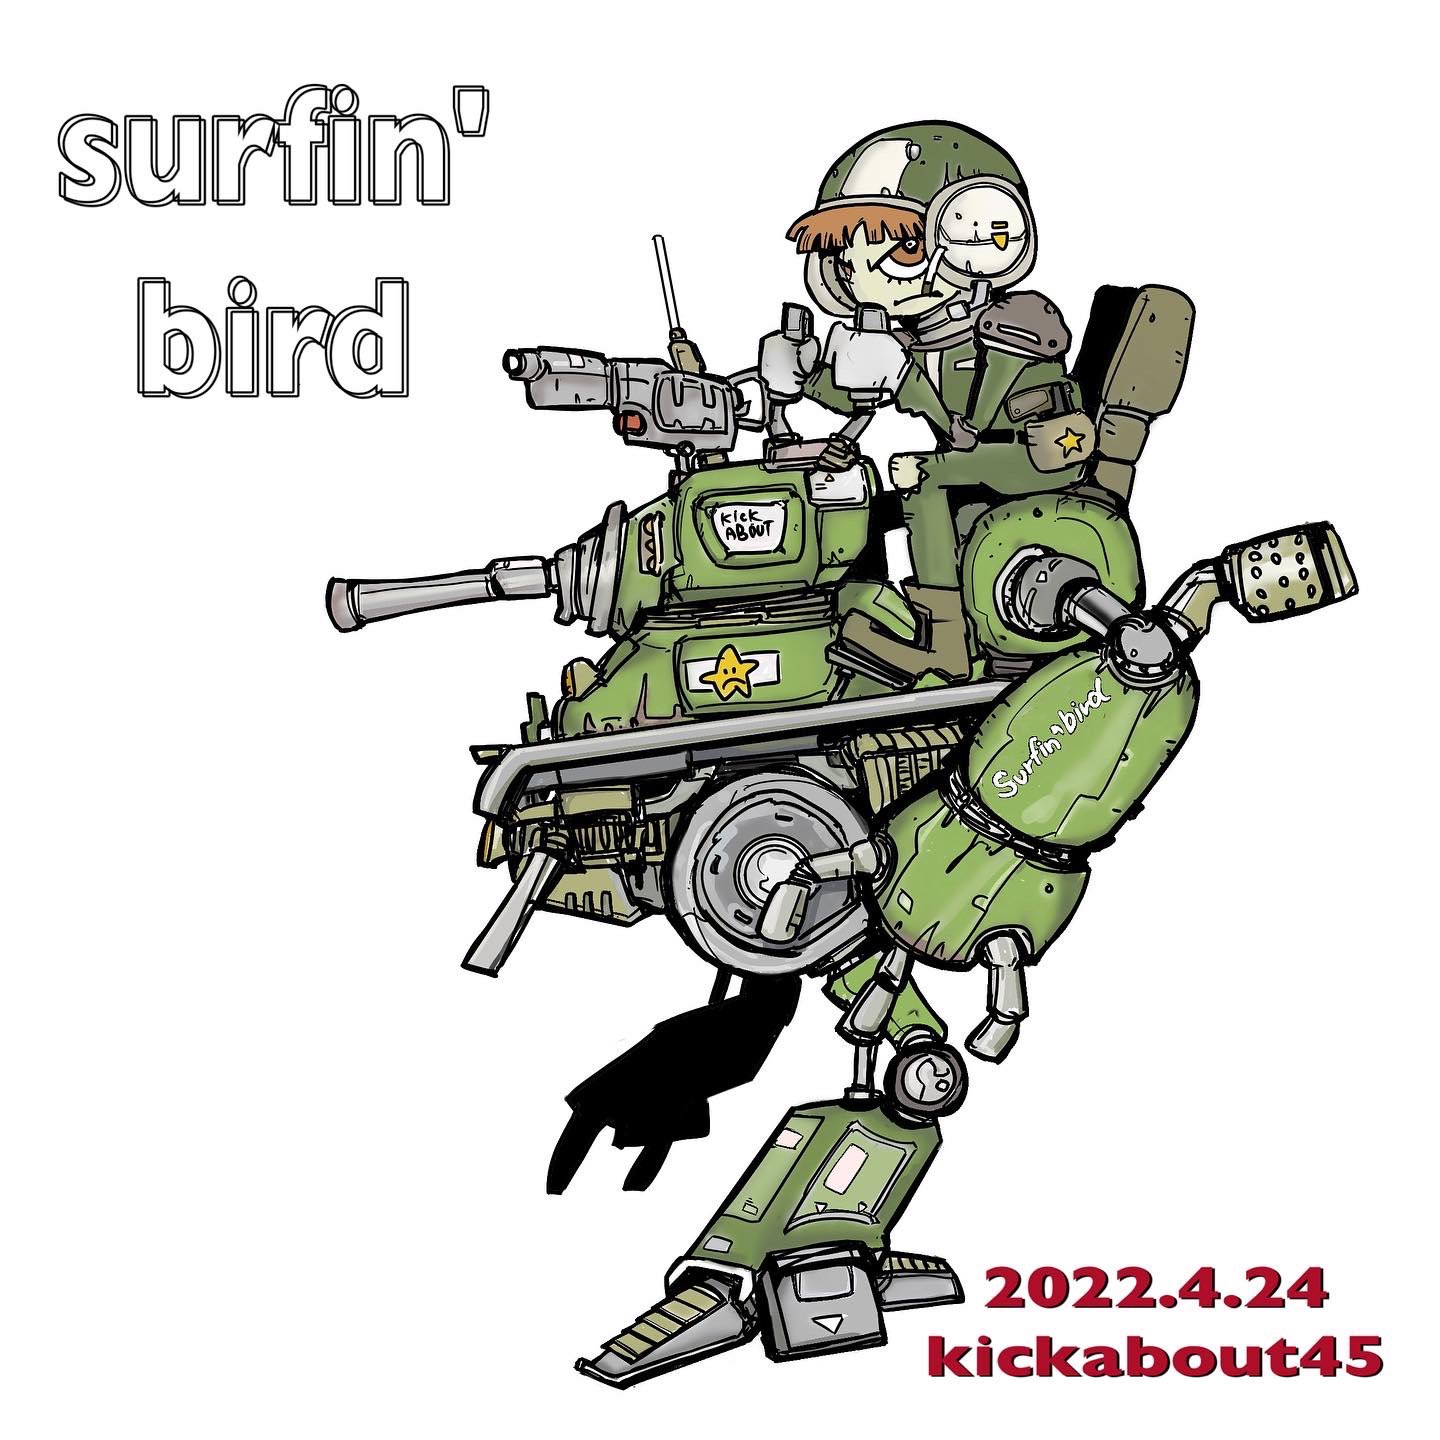 Kickabout45 ロボットイラスト オリジナルキャラクター 戦車 女戦士 イラスト T Co Dcympeggcp Twitter